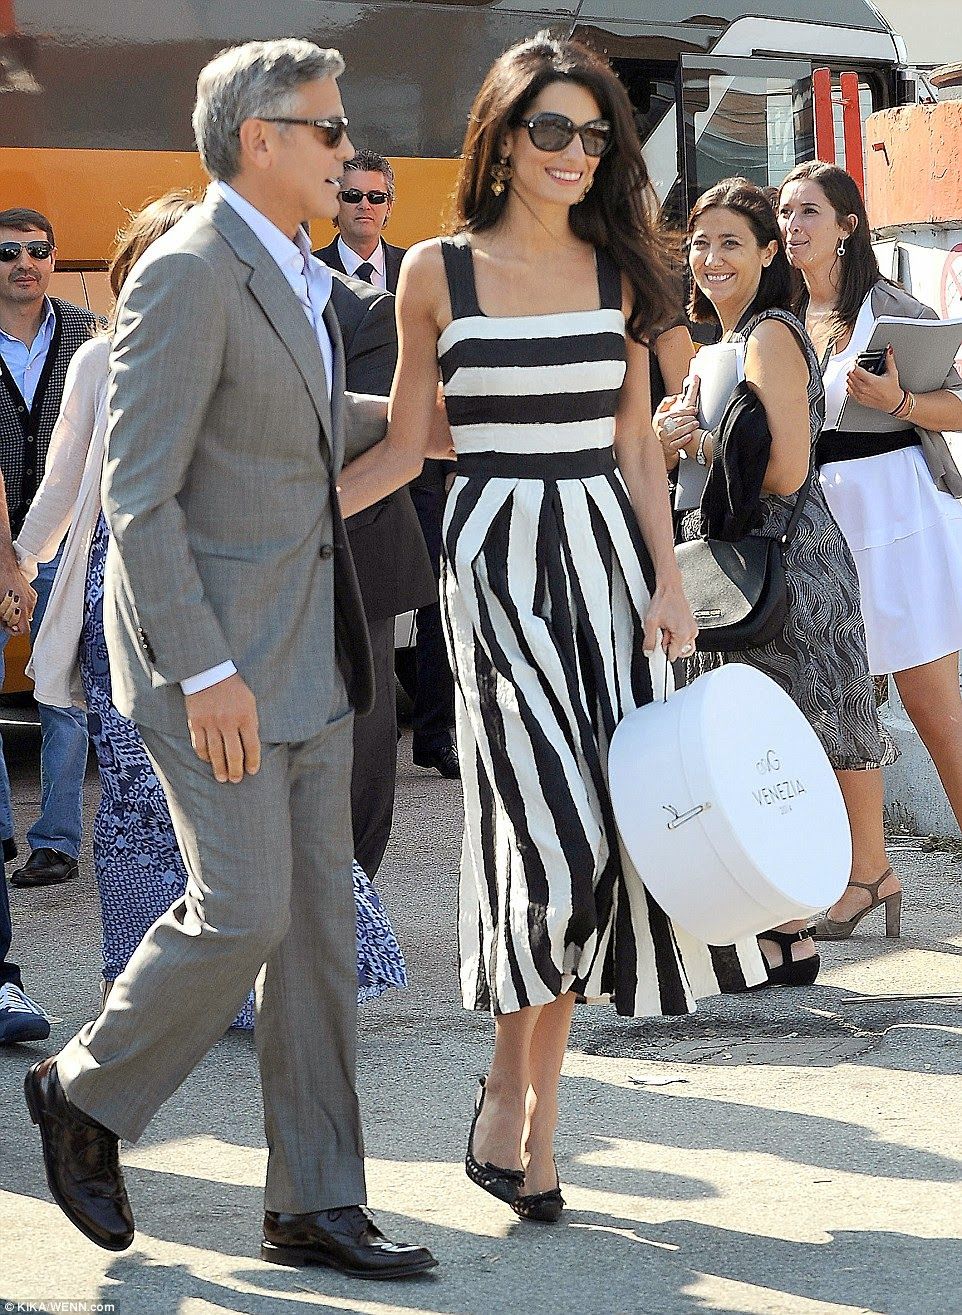 George Clooney with Amal Alamuddin in Venice before their wedding, 2014